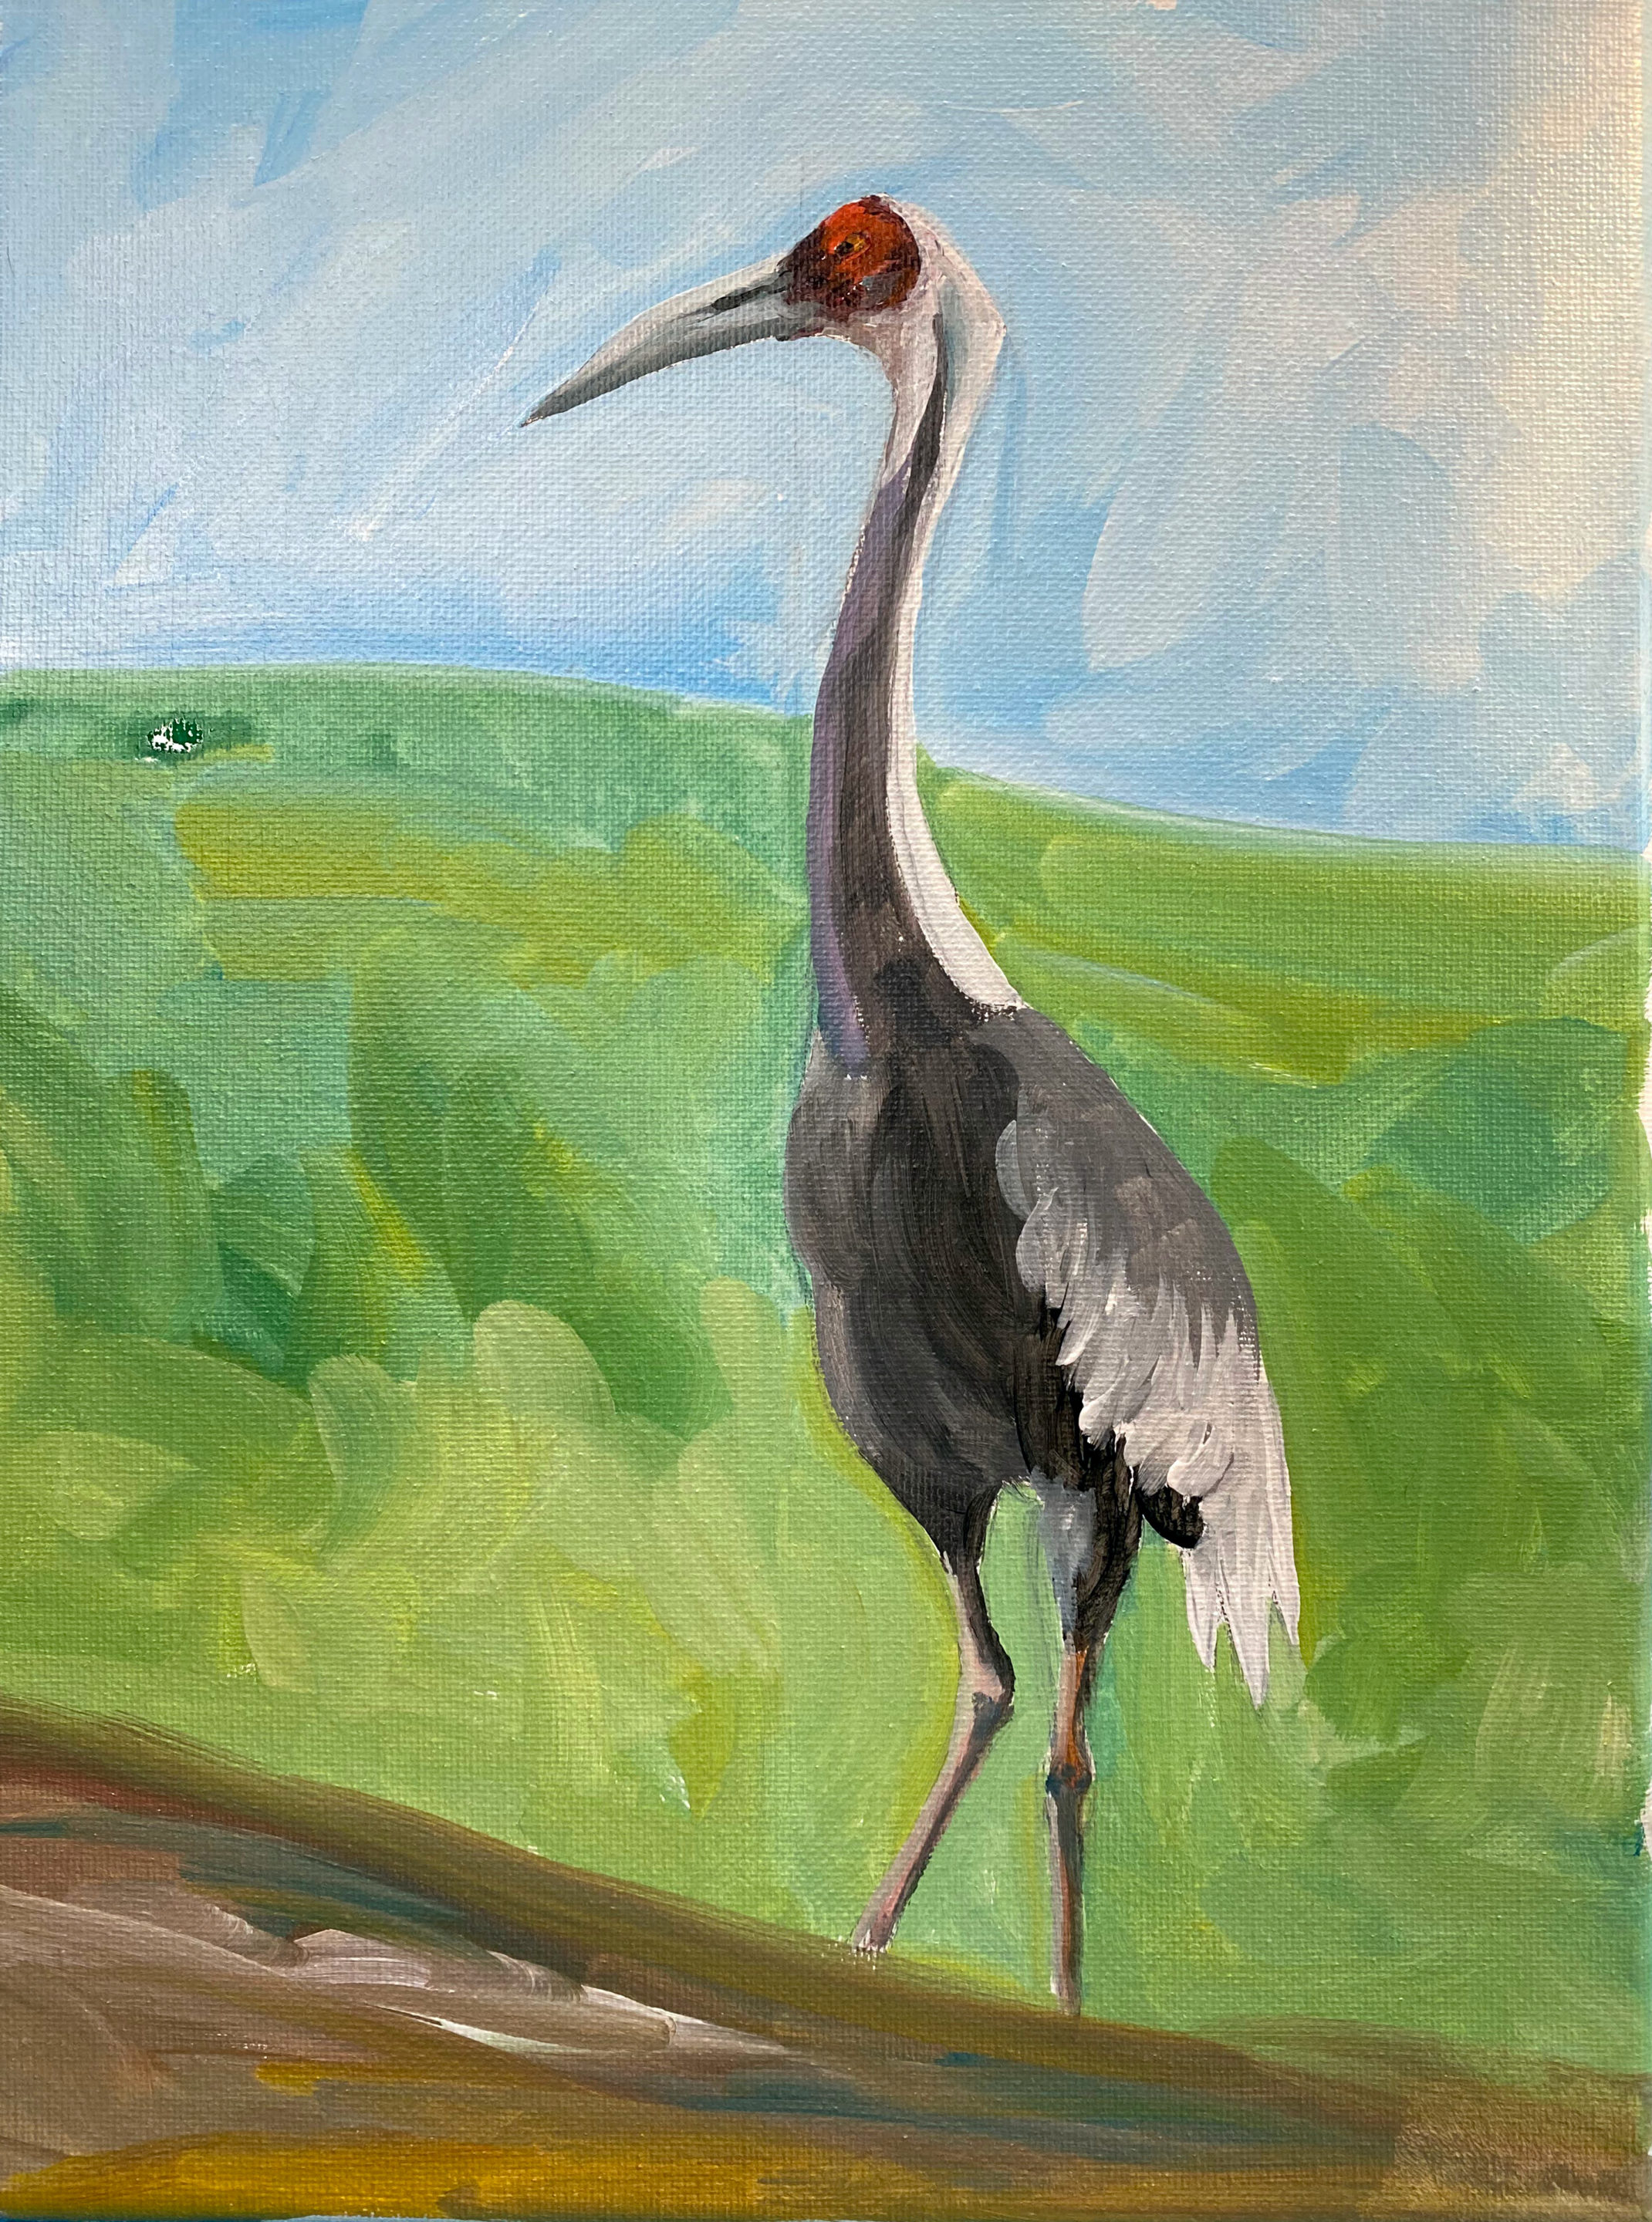 White-Naped Crane from Creatively Uncorked http://creativelyuncorked.com/